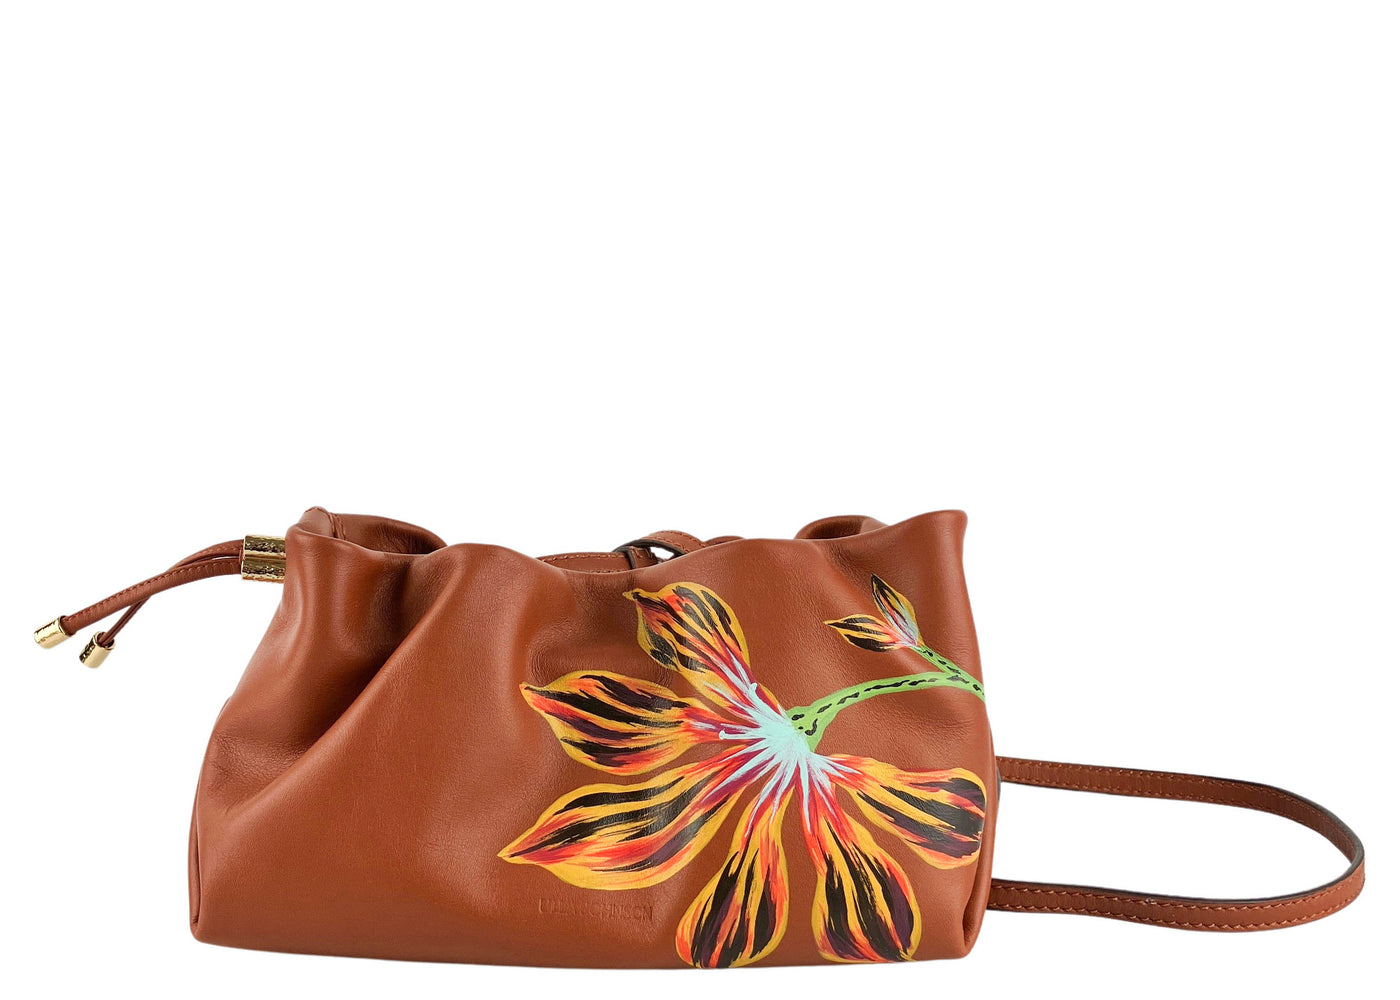 Ulla Johnson Remy Mini Soft Clutch in Sierra Floral - Discounts on Ulla Johnson at UAL